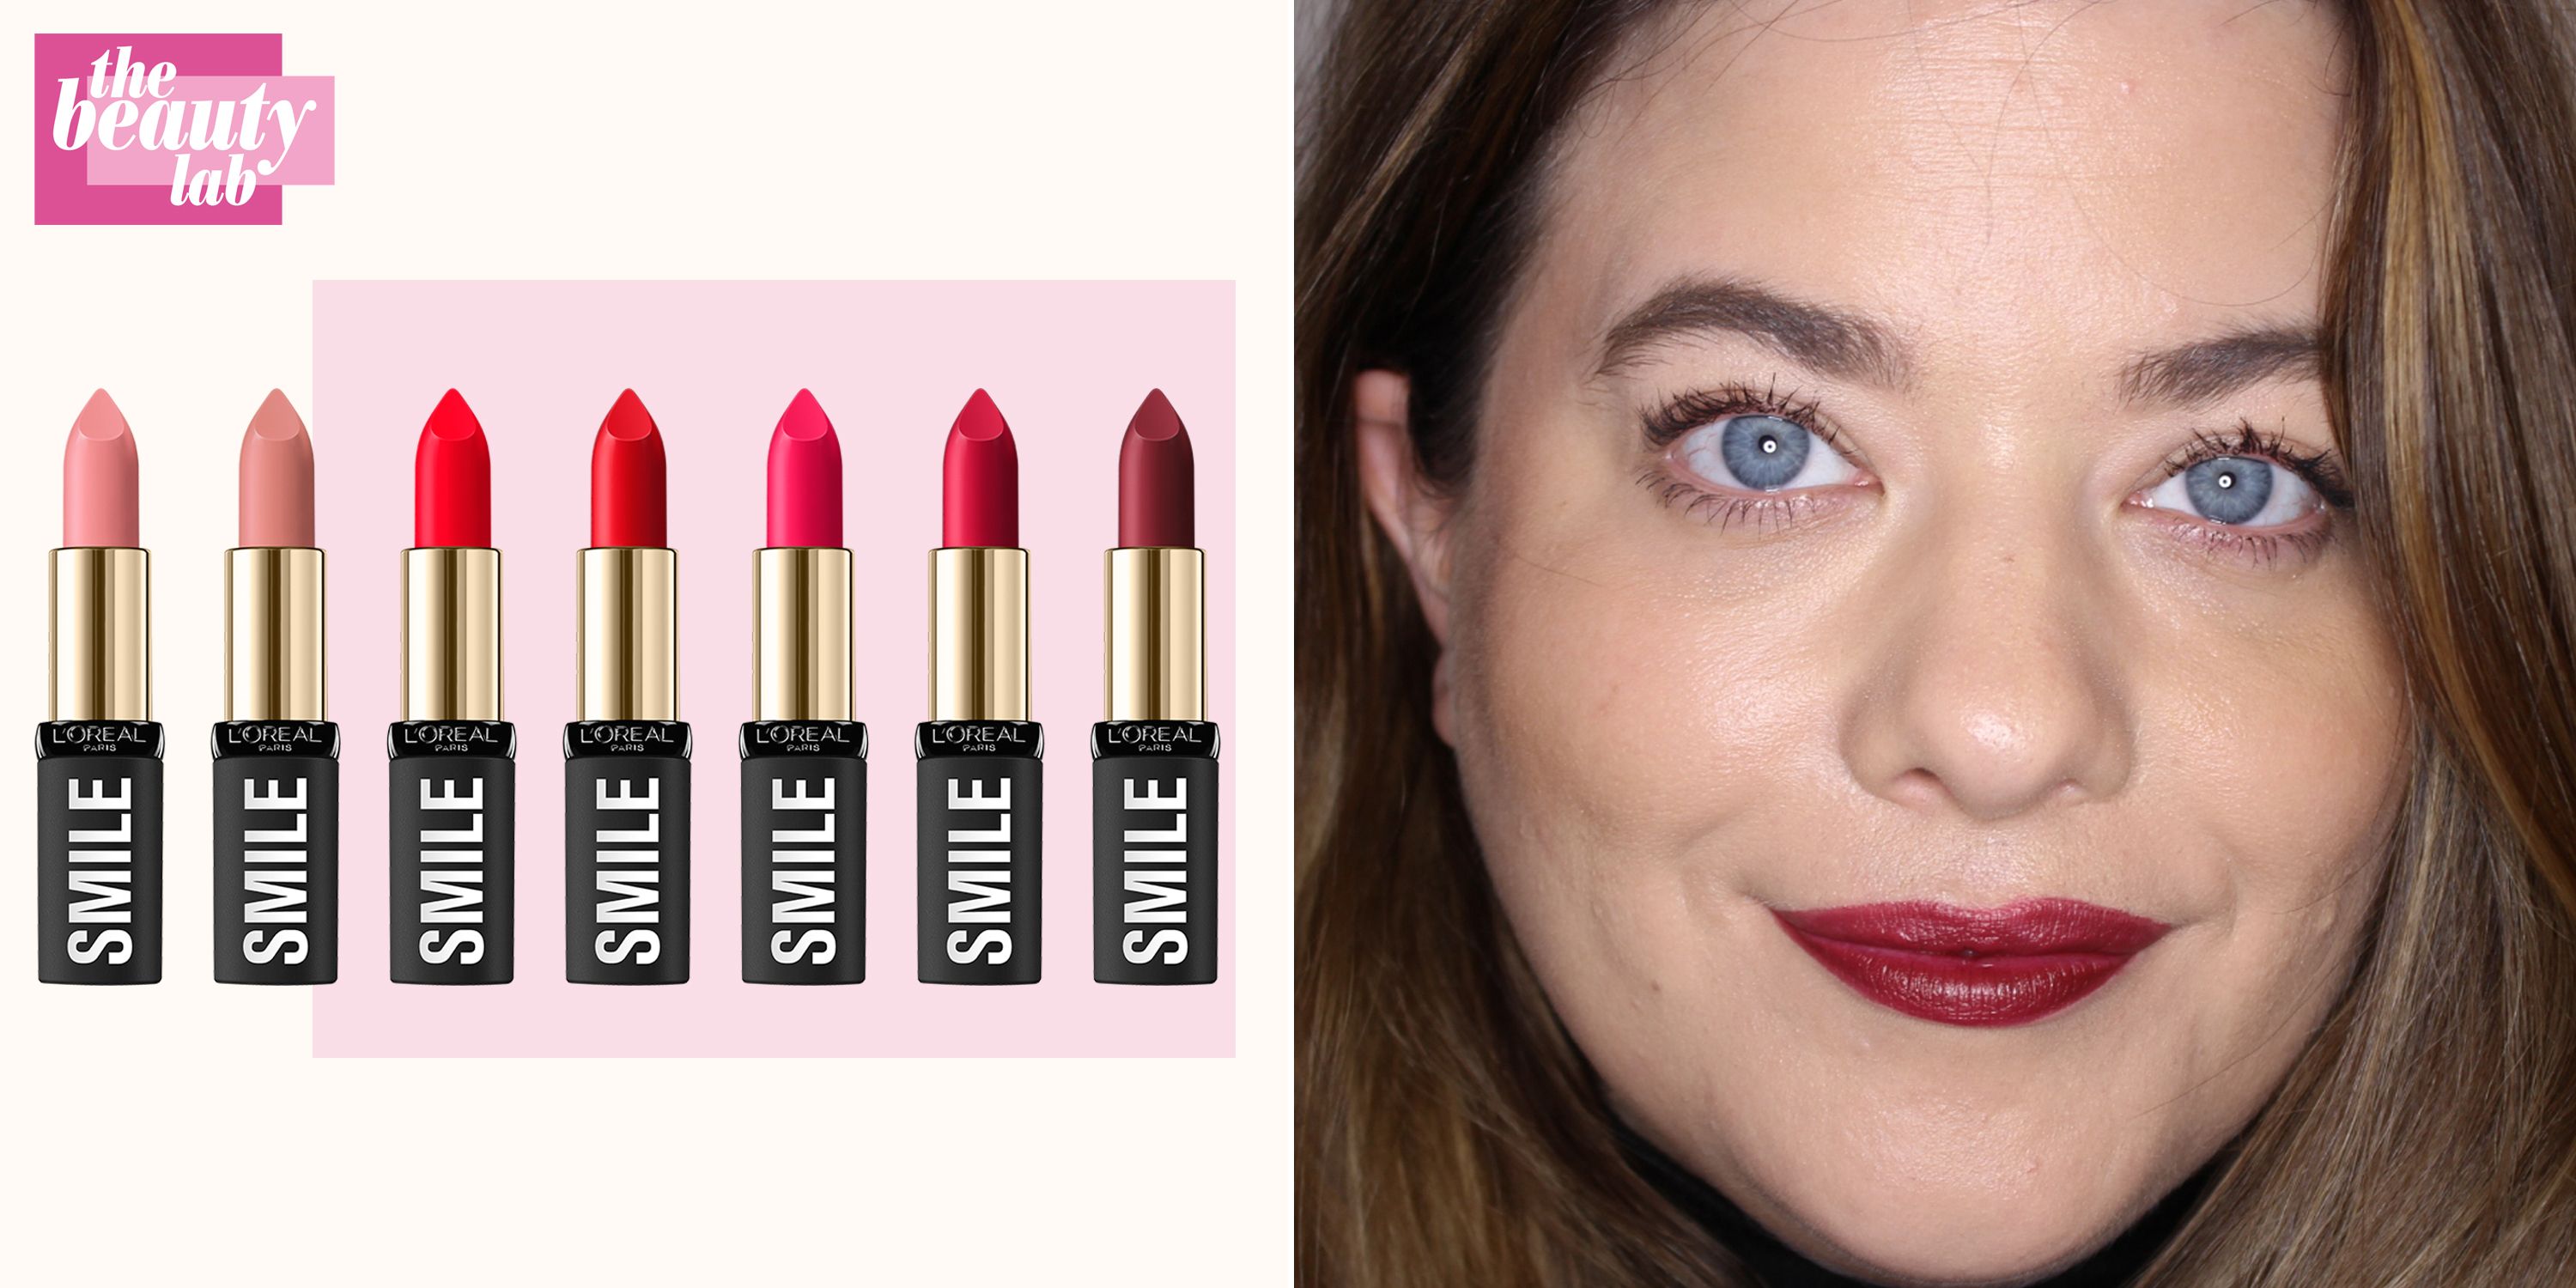 Paris Isabel Marant Makeup Collection Every Shade From Nude to Burgundy